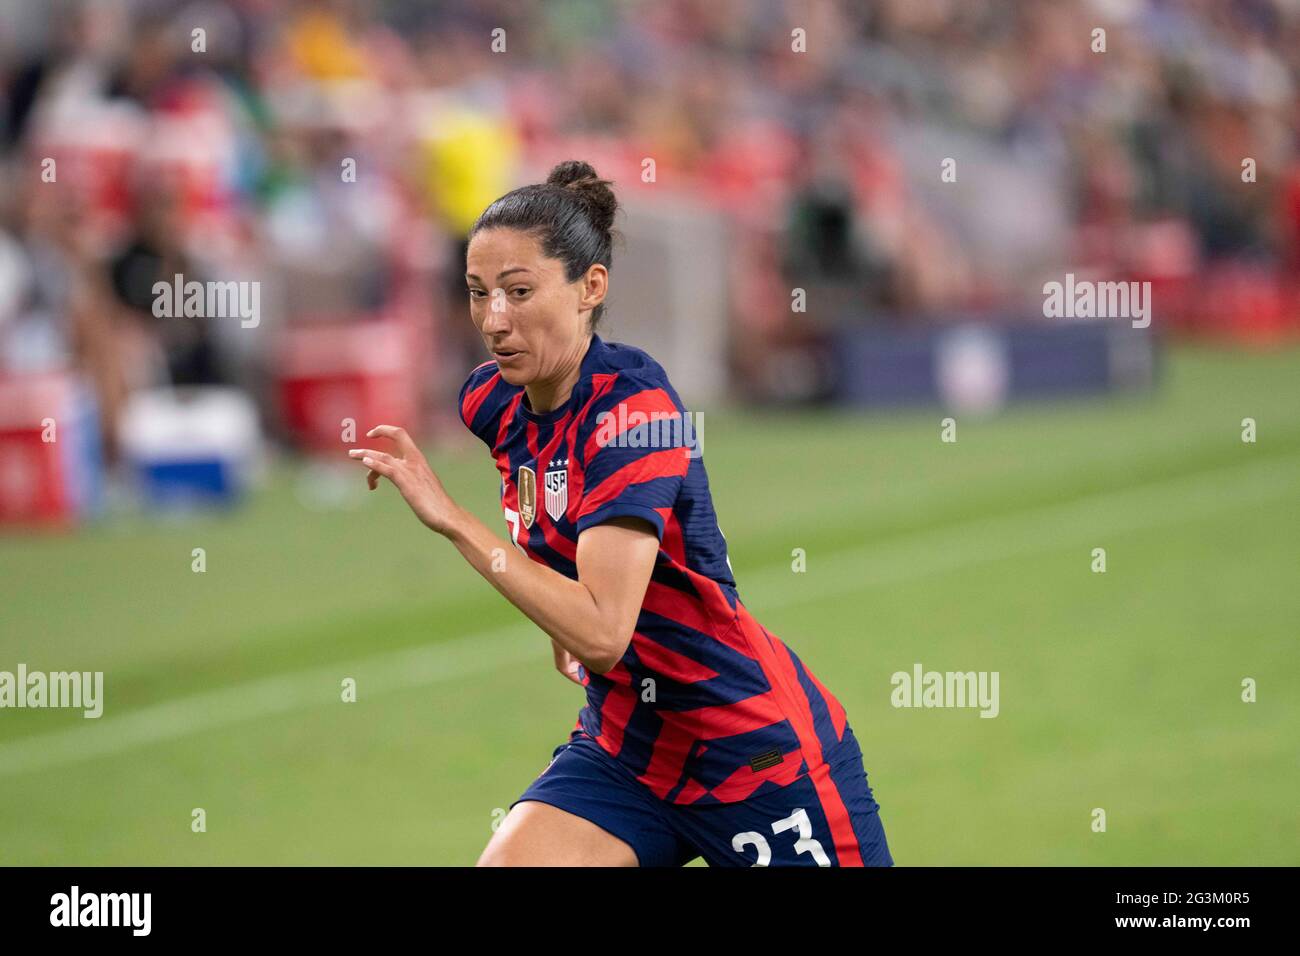 Austin, Texas, USA, June 16 2021: Veteran CHRISTEN PRESS (23) chases a loose ball during the second half of the US Women's National Team (USWNT) victory over Nigeria, 2-0 in the inaugural match of Austin's new Q2 Stadium. The U.S. women's team, an Olympic favorite, is wrapping up a series of summer matches to prep for the Tokyo Games. Press scored a goal in the win for USA Soccer. Credit: Bob Daemmrich/Alamy Live News Stock Photo